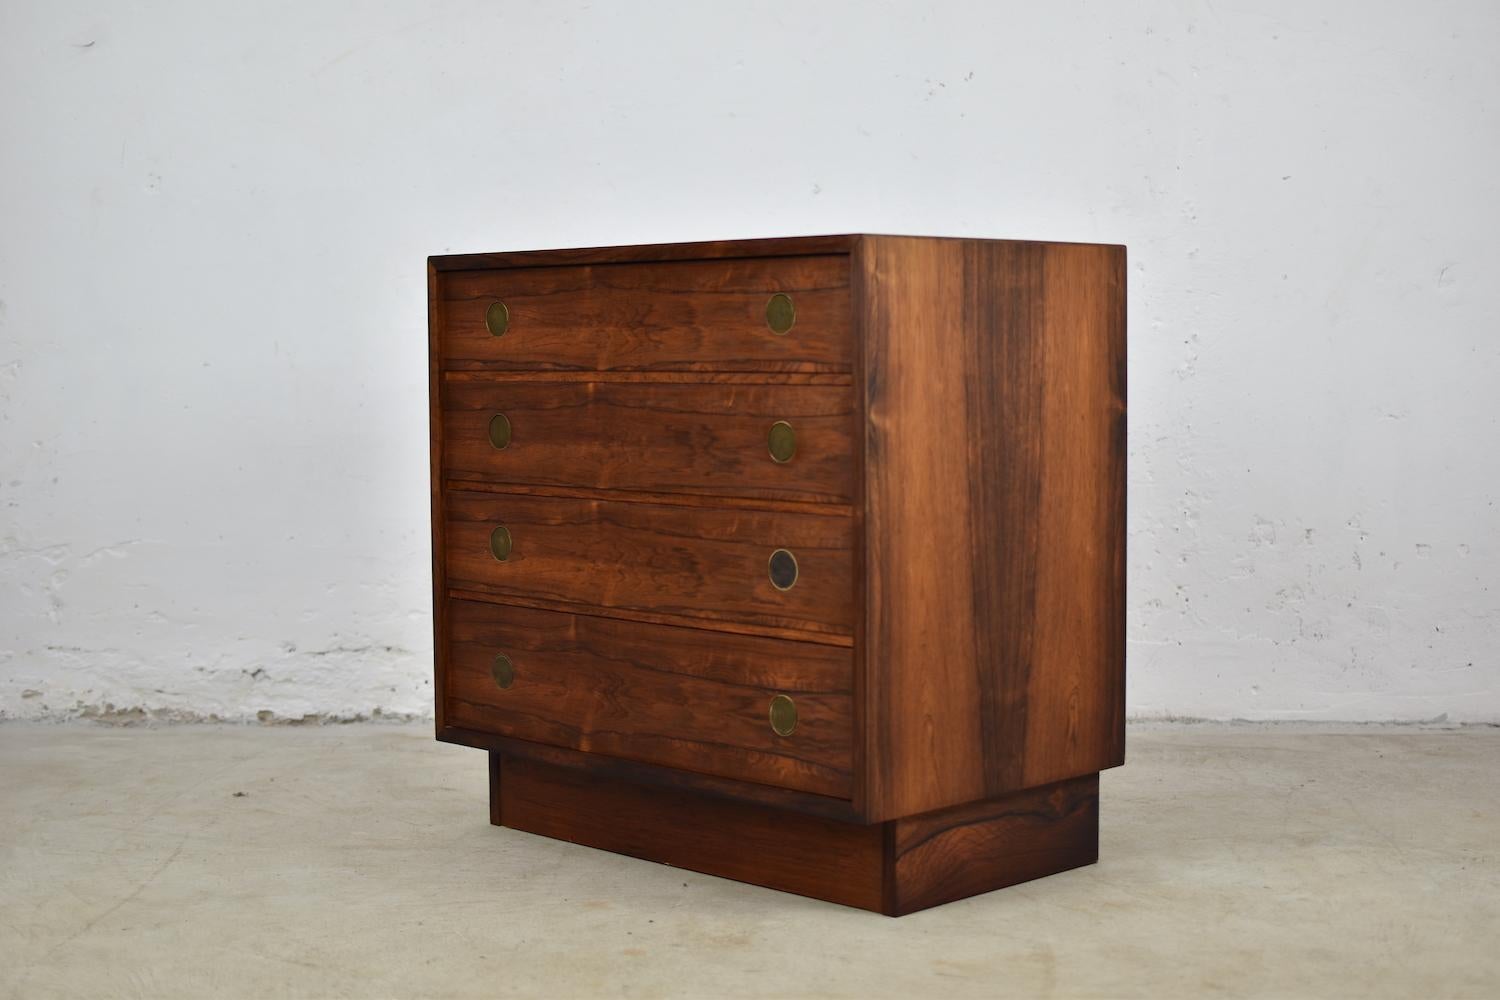 Lovely chest of drawers produced by Dyrlund, Denmark, 1960s. This rosewood cabinet has four marvelous drawers all with bronze circular handles. Impressive patina. Masterpiece.